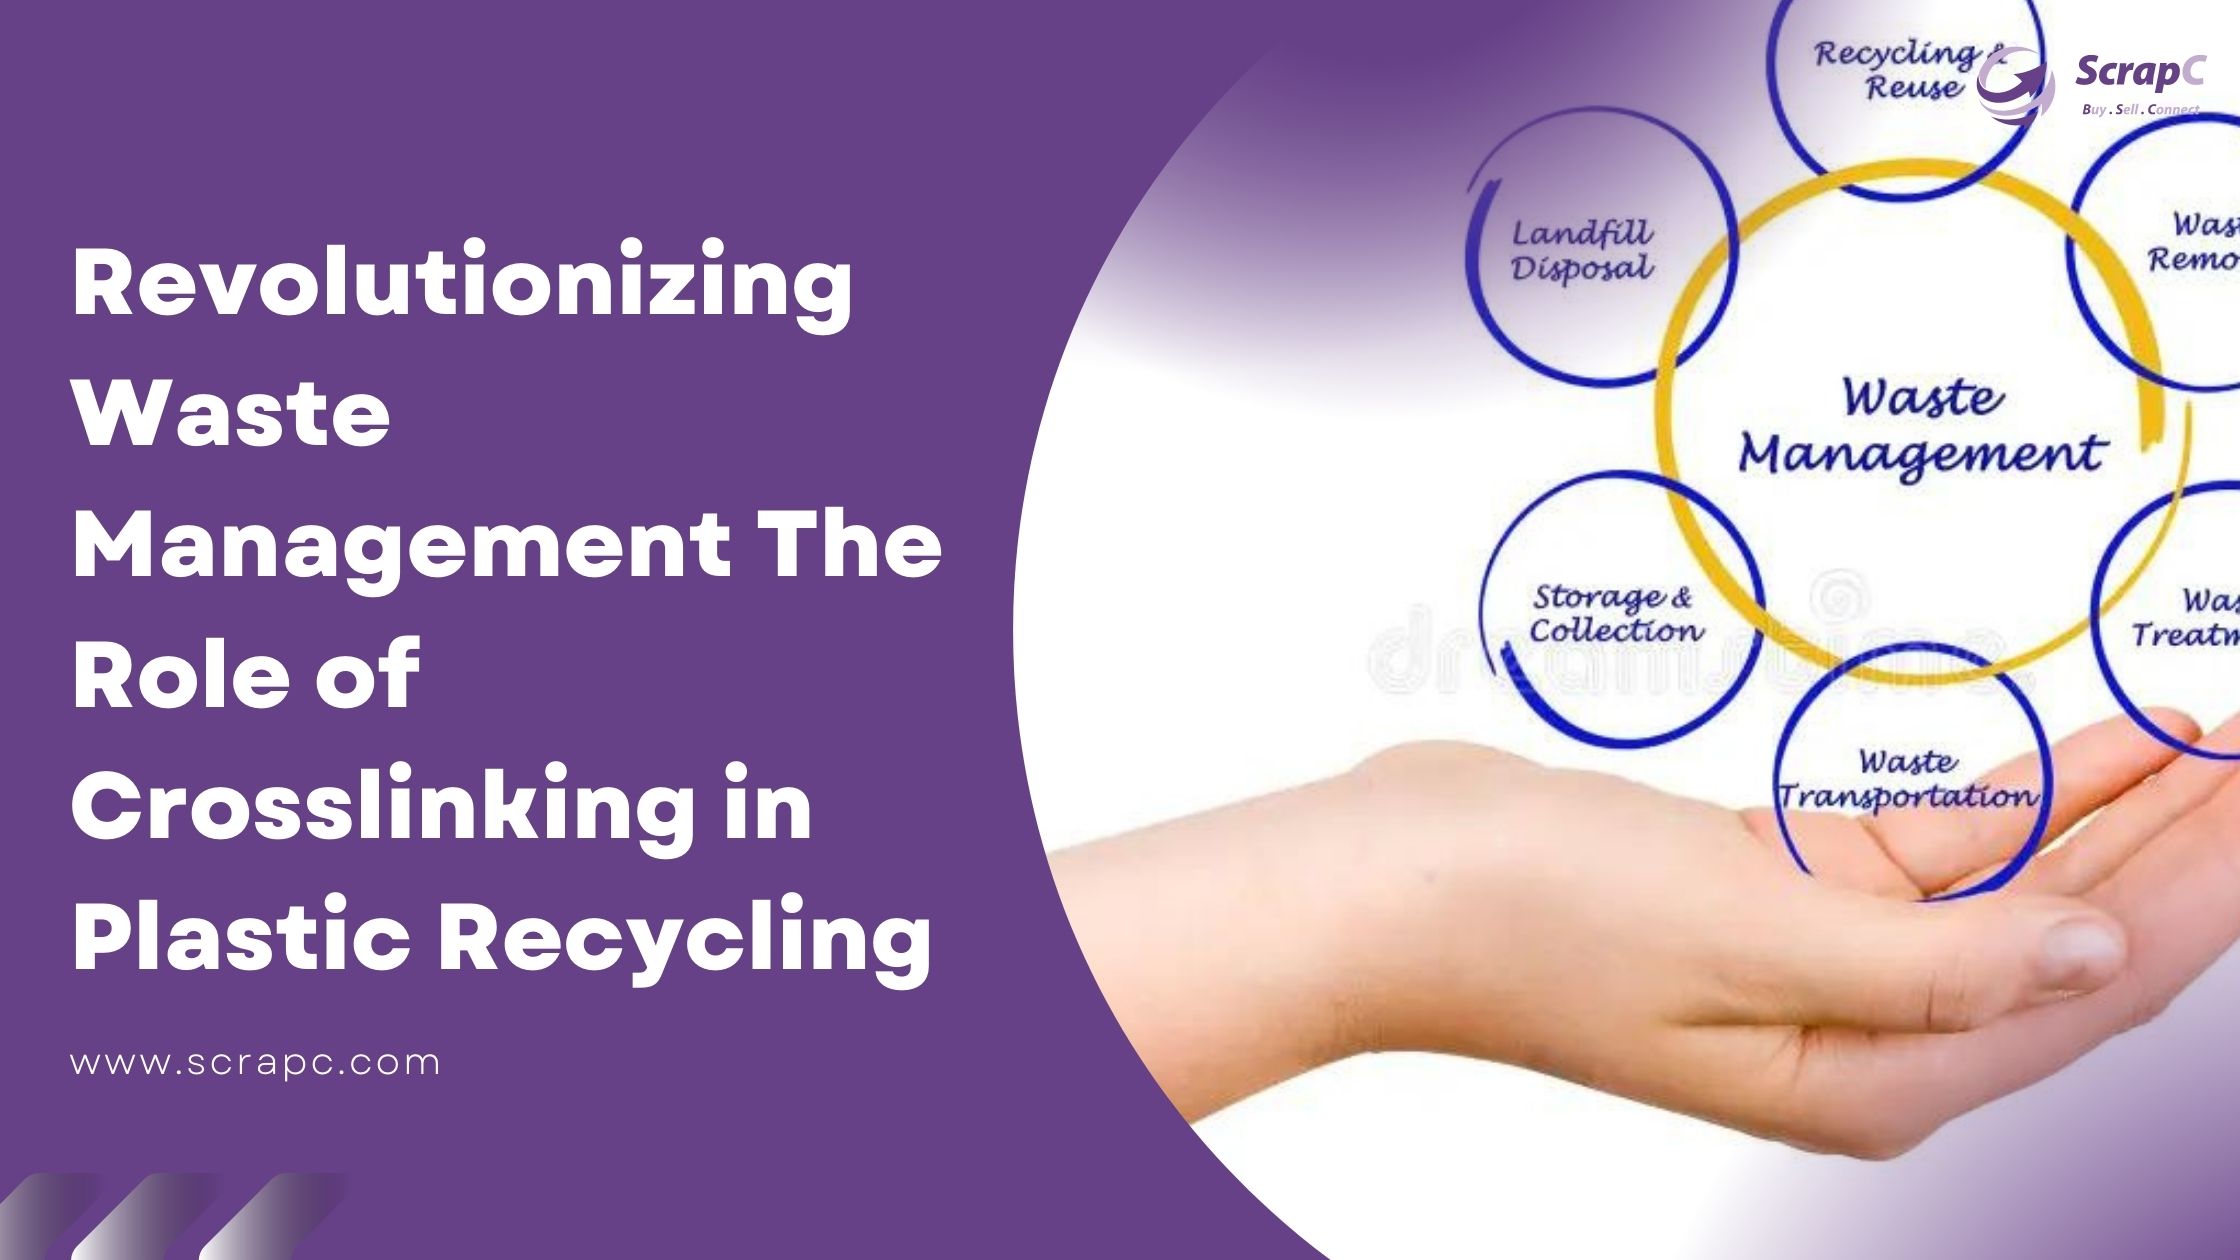 "Crosslinking in Plastic Recycling - Revolutionizing Waste Management"